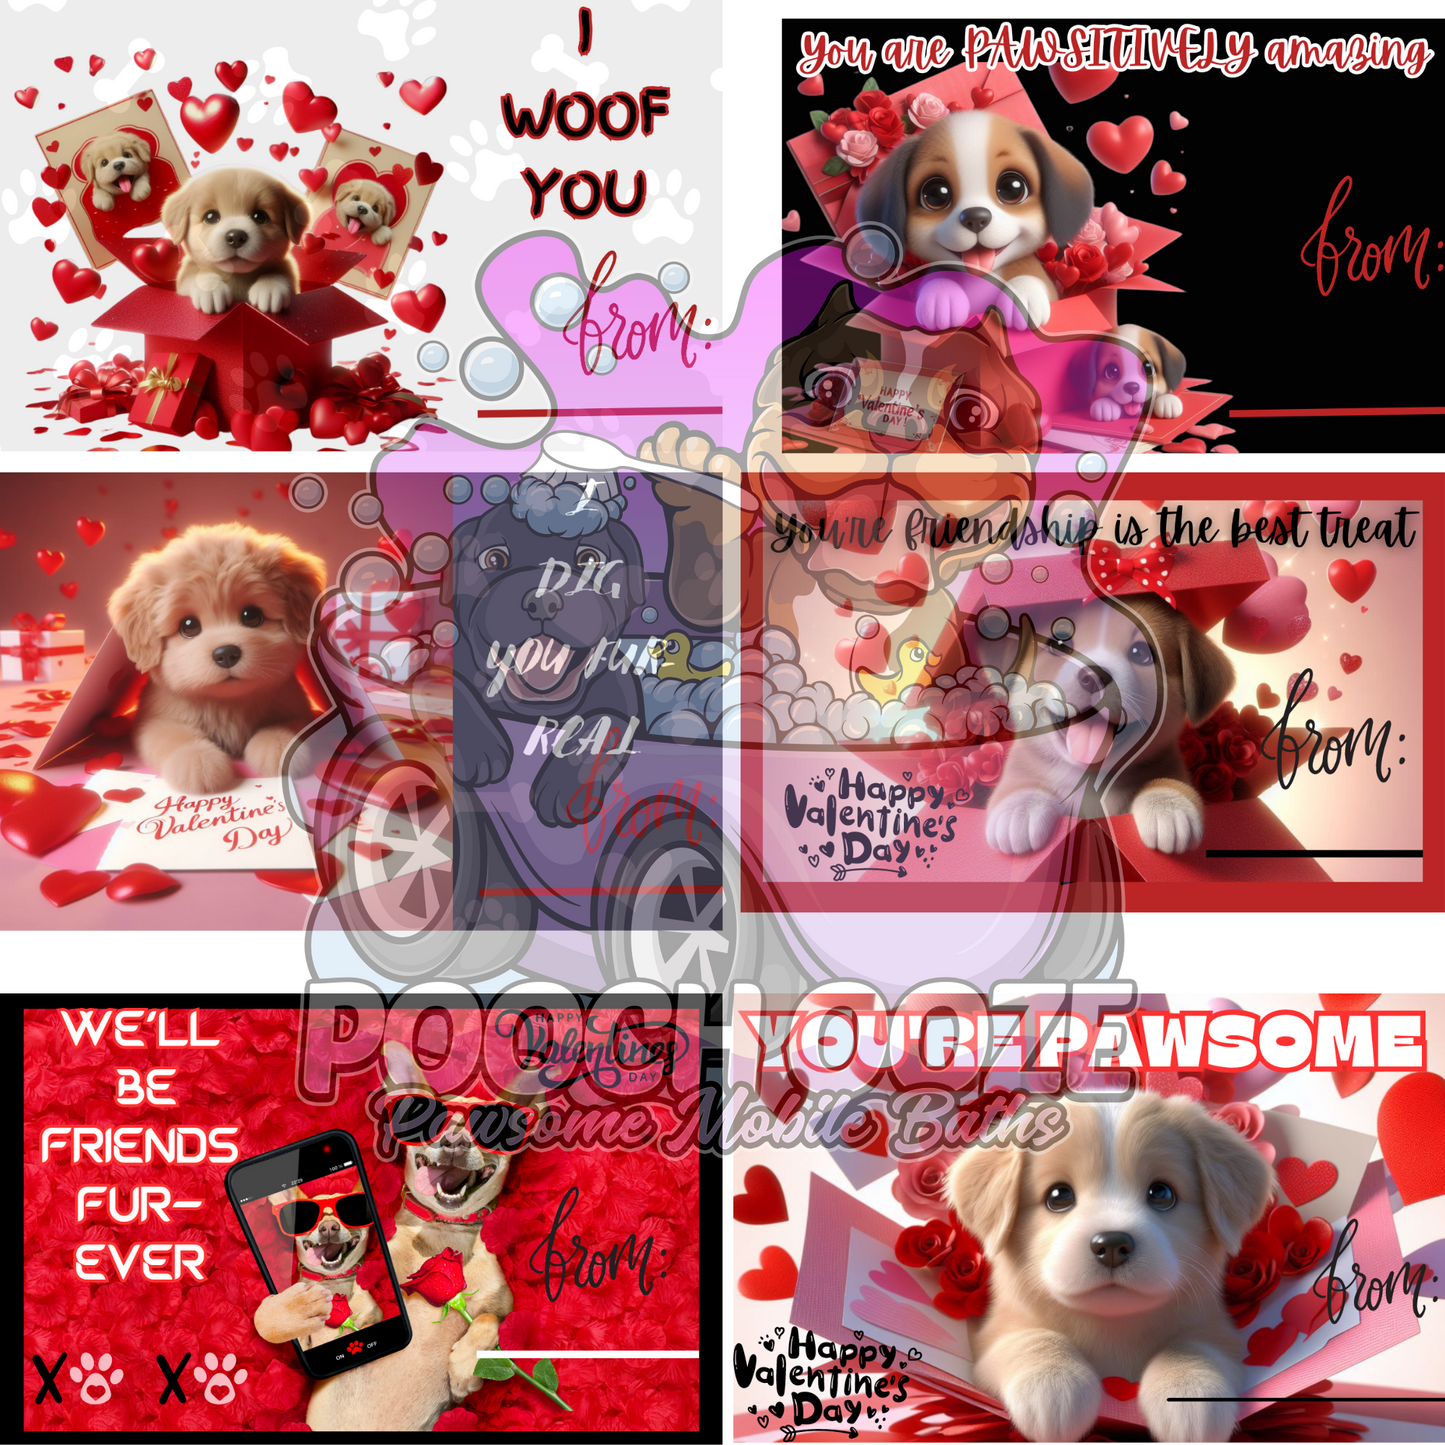 Puppy love vday cards